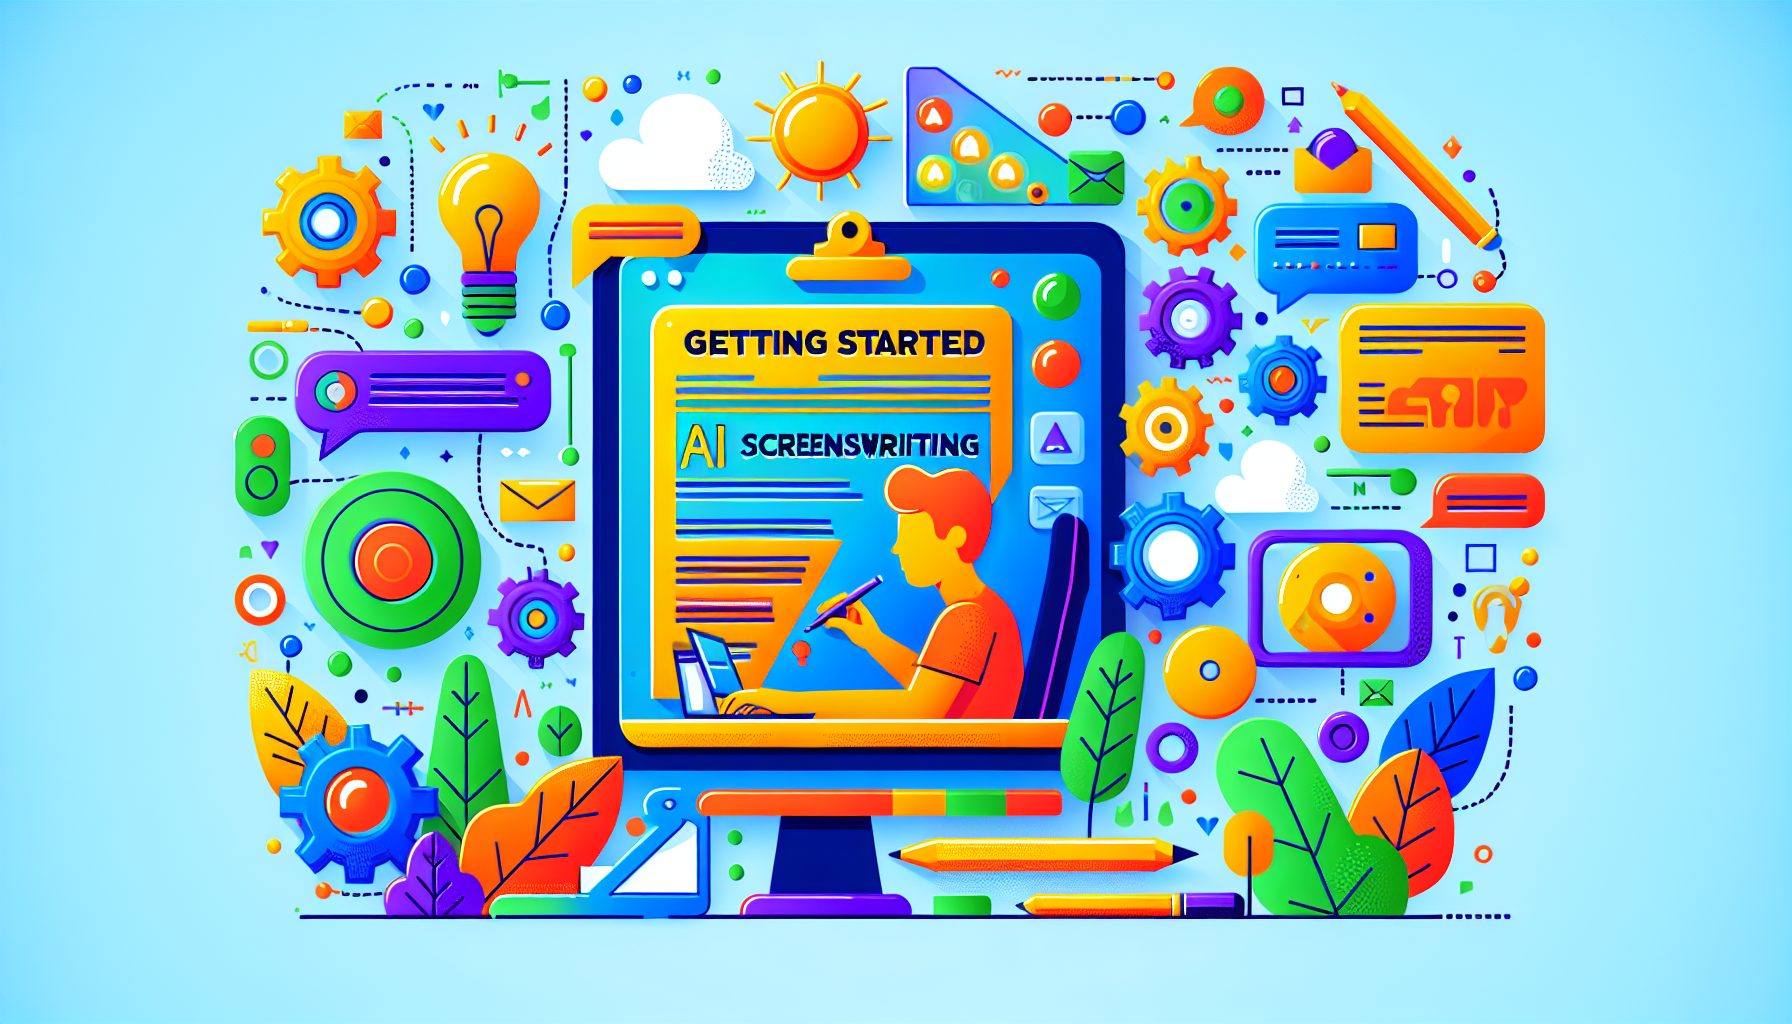 Create a colorful and modern illustration that represents the concept of 'Getting Started with AI Screenwriting.' This should be an infographic-style illustration without any words or text, designed to intuitively convey the process of starting to use AI for screenwriting in a simple and accessible way. The image should be bright, vibrant and engaging, reflecting a modern approach to technology and screenwriting.